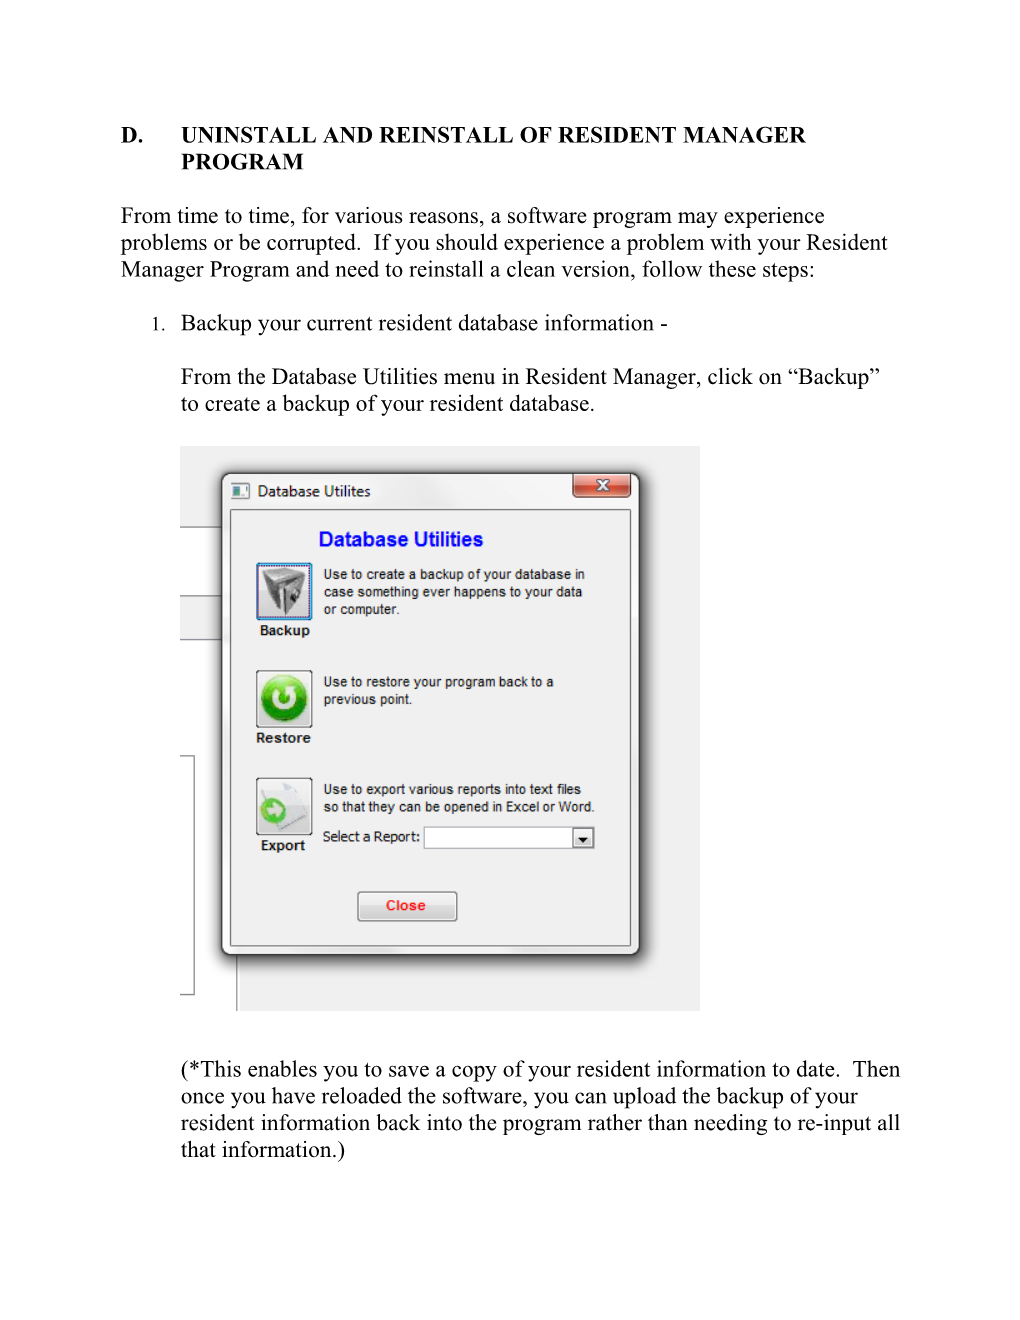 D. Uninstall and Reinstall of Resident Manager Program